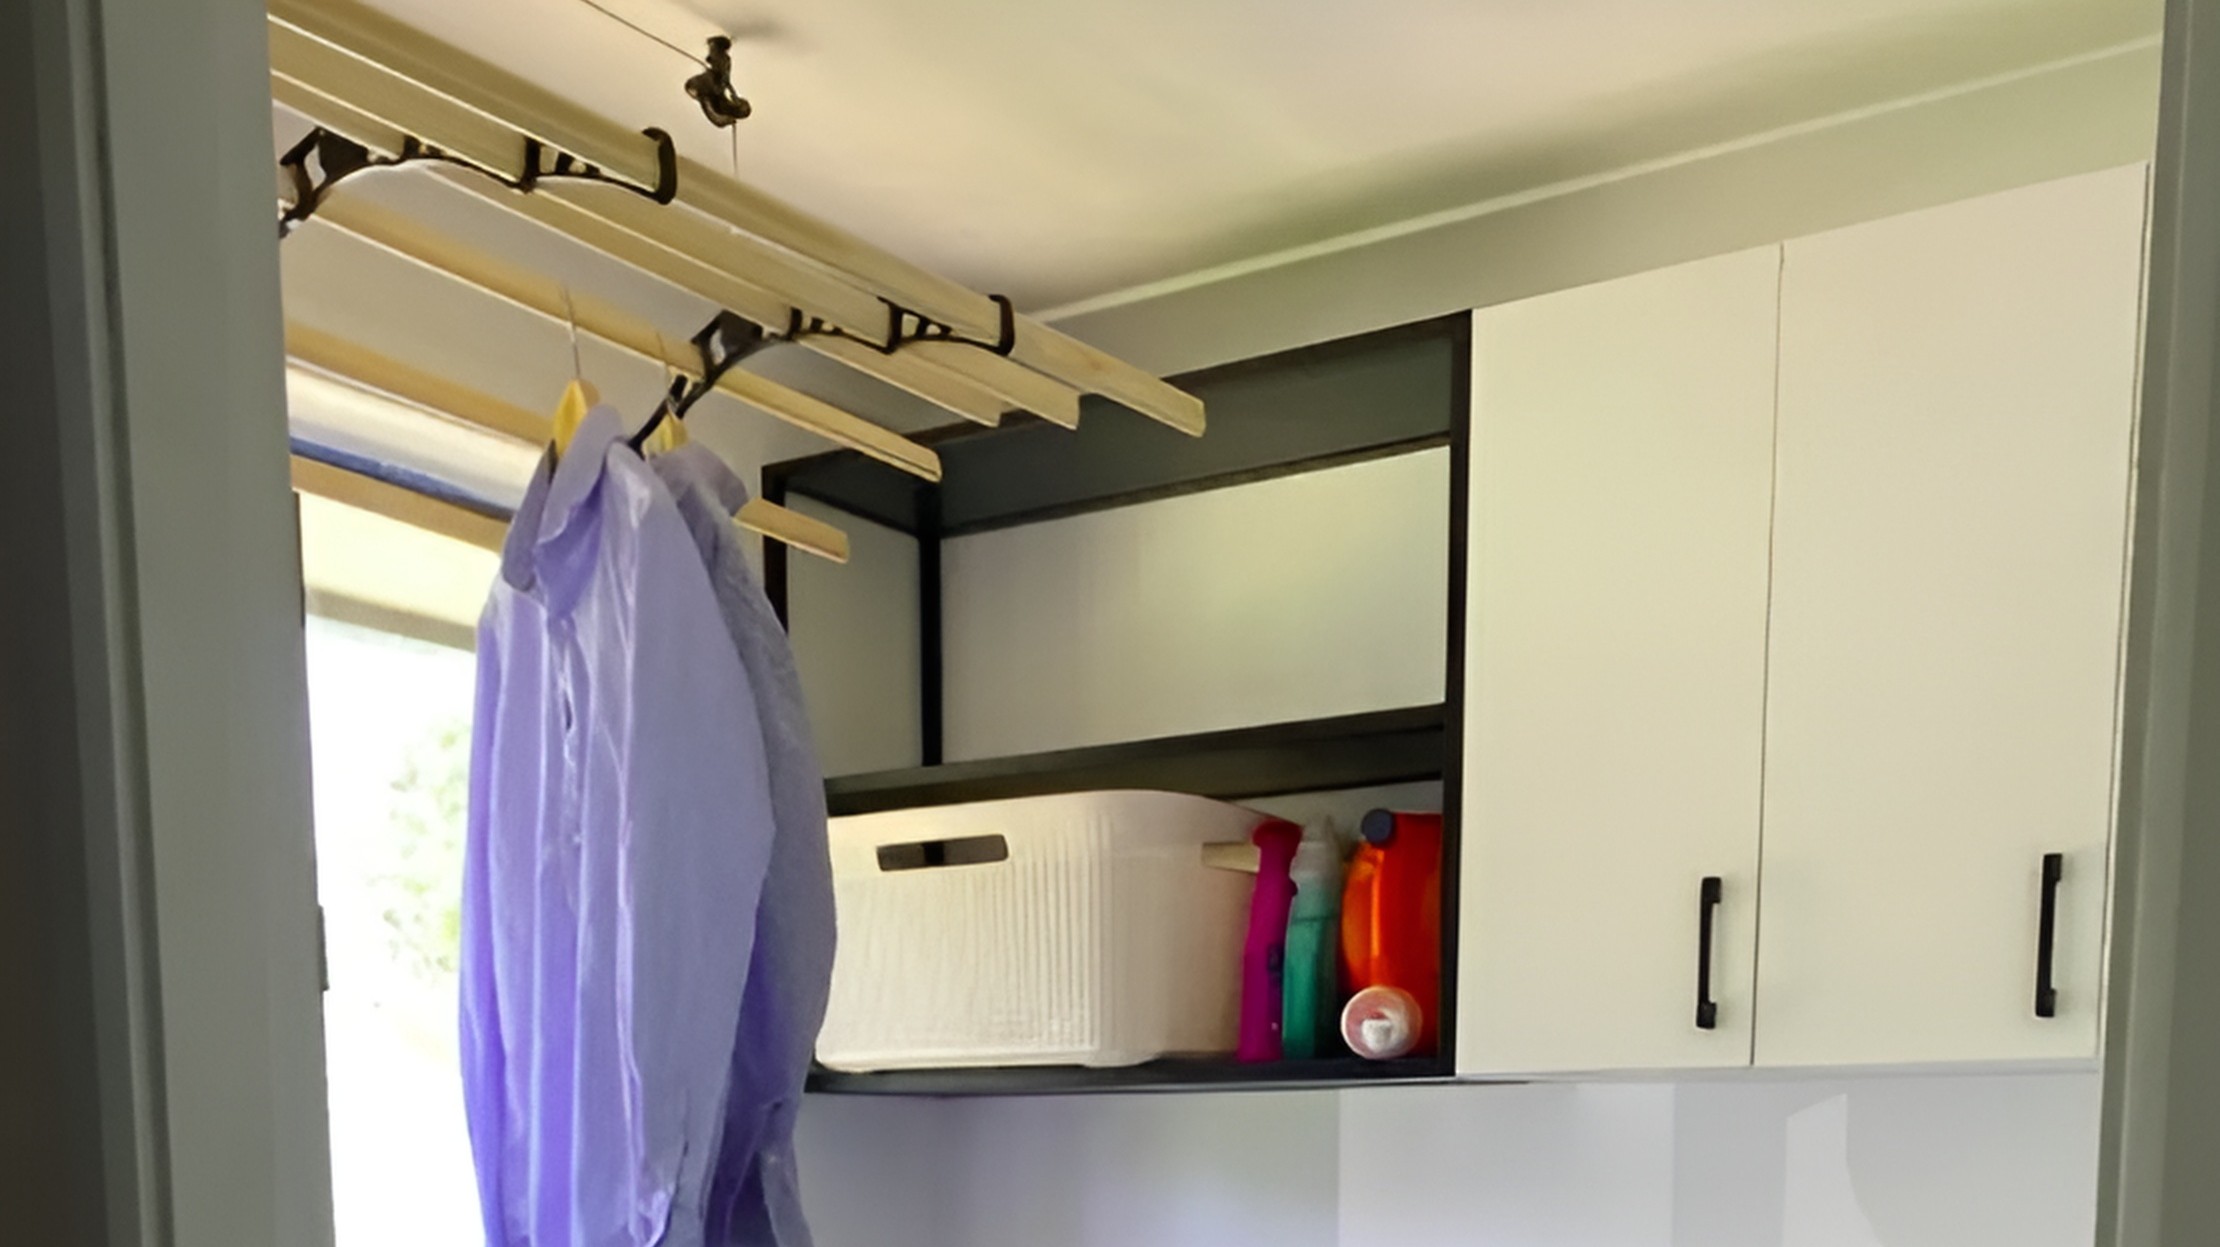 Laundry Airers in Australia Space-Saving Design